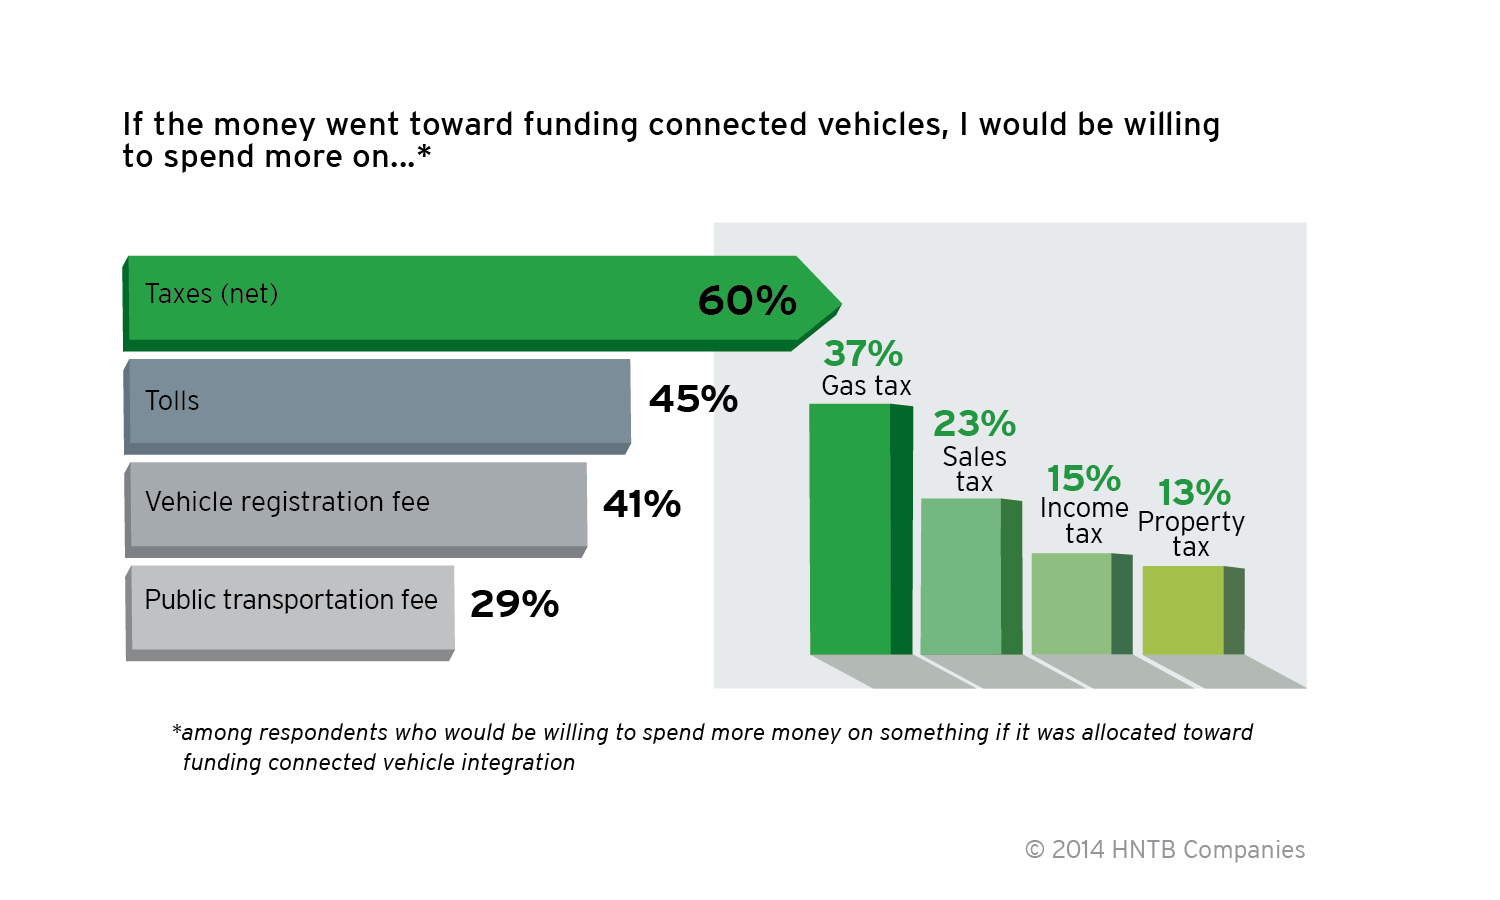 More than 2 in 3 (67 percent) said they are willing to spend more money if it went toward funding connect vehicle integration.